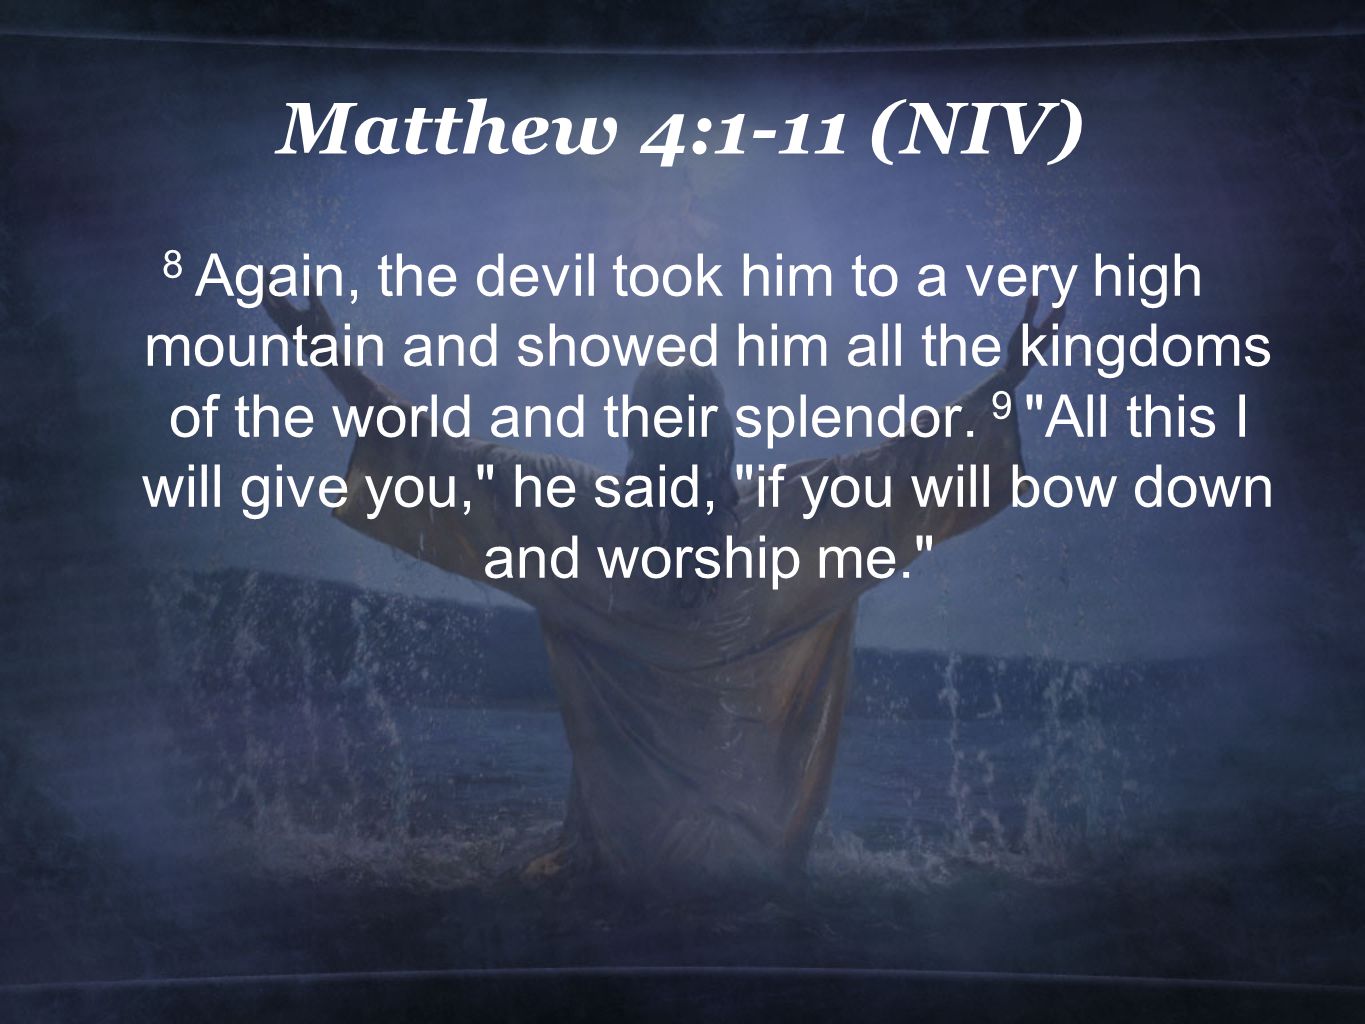 Matthew 4:1-11 (NIV) 8 Again, the devil took him to a very high mountain and showed him all the kingdoms of the world and their splendor.